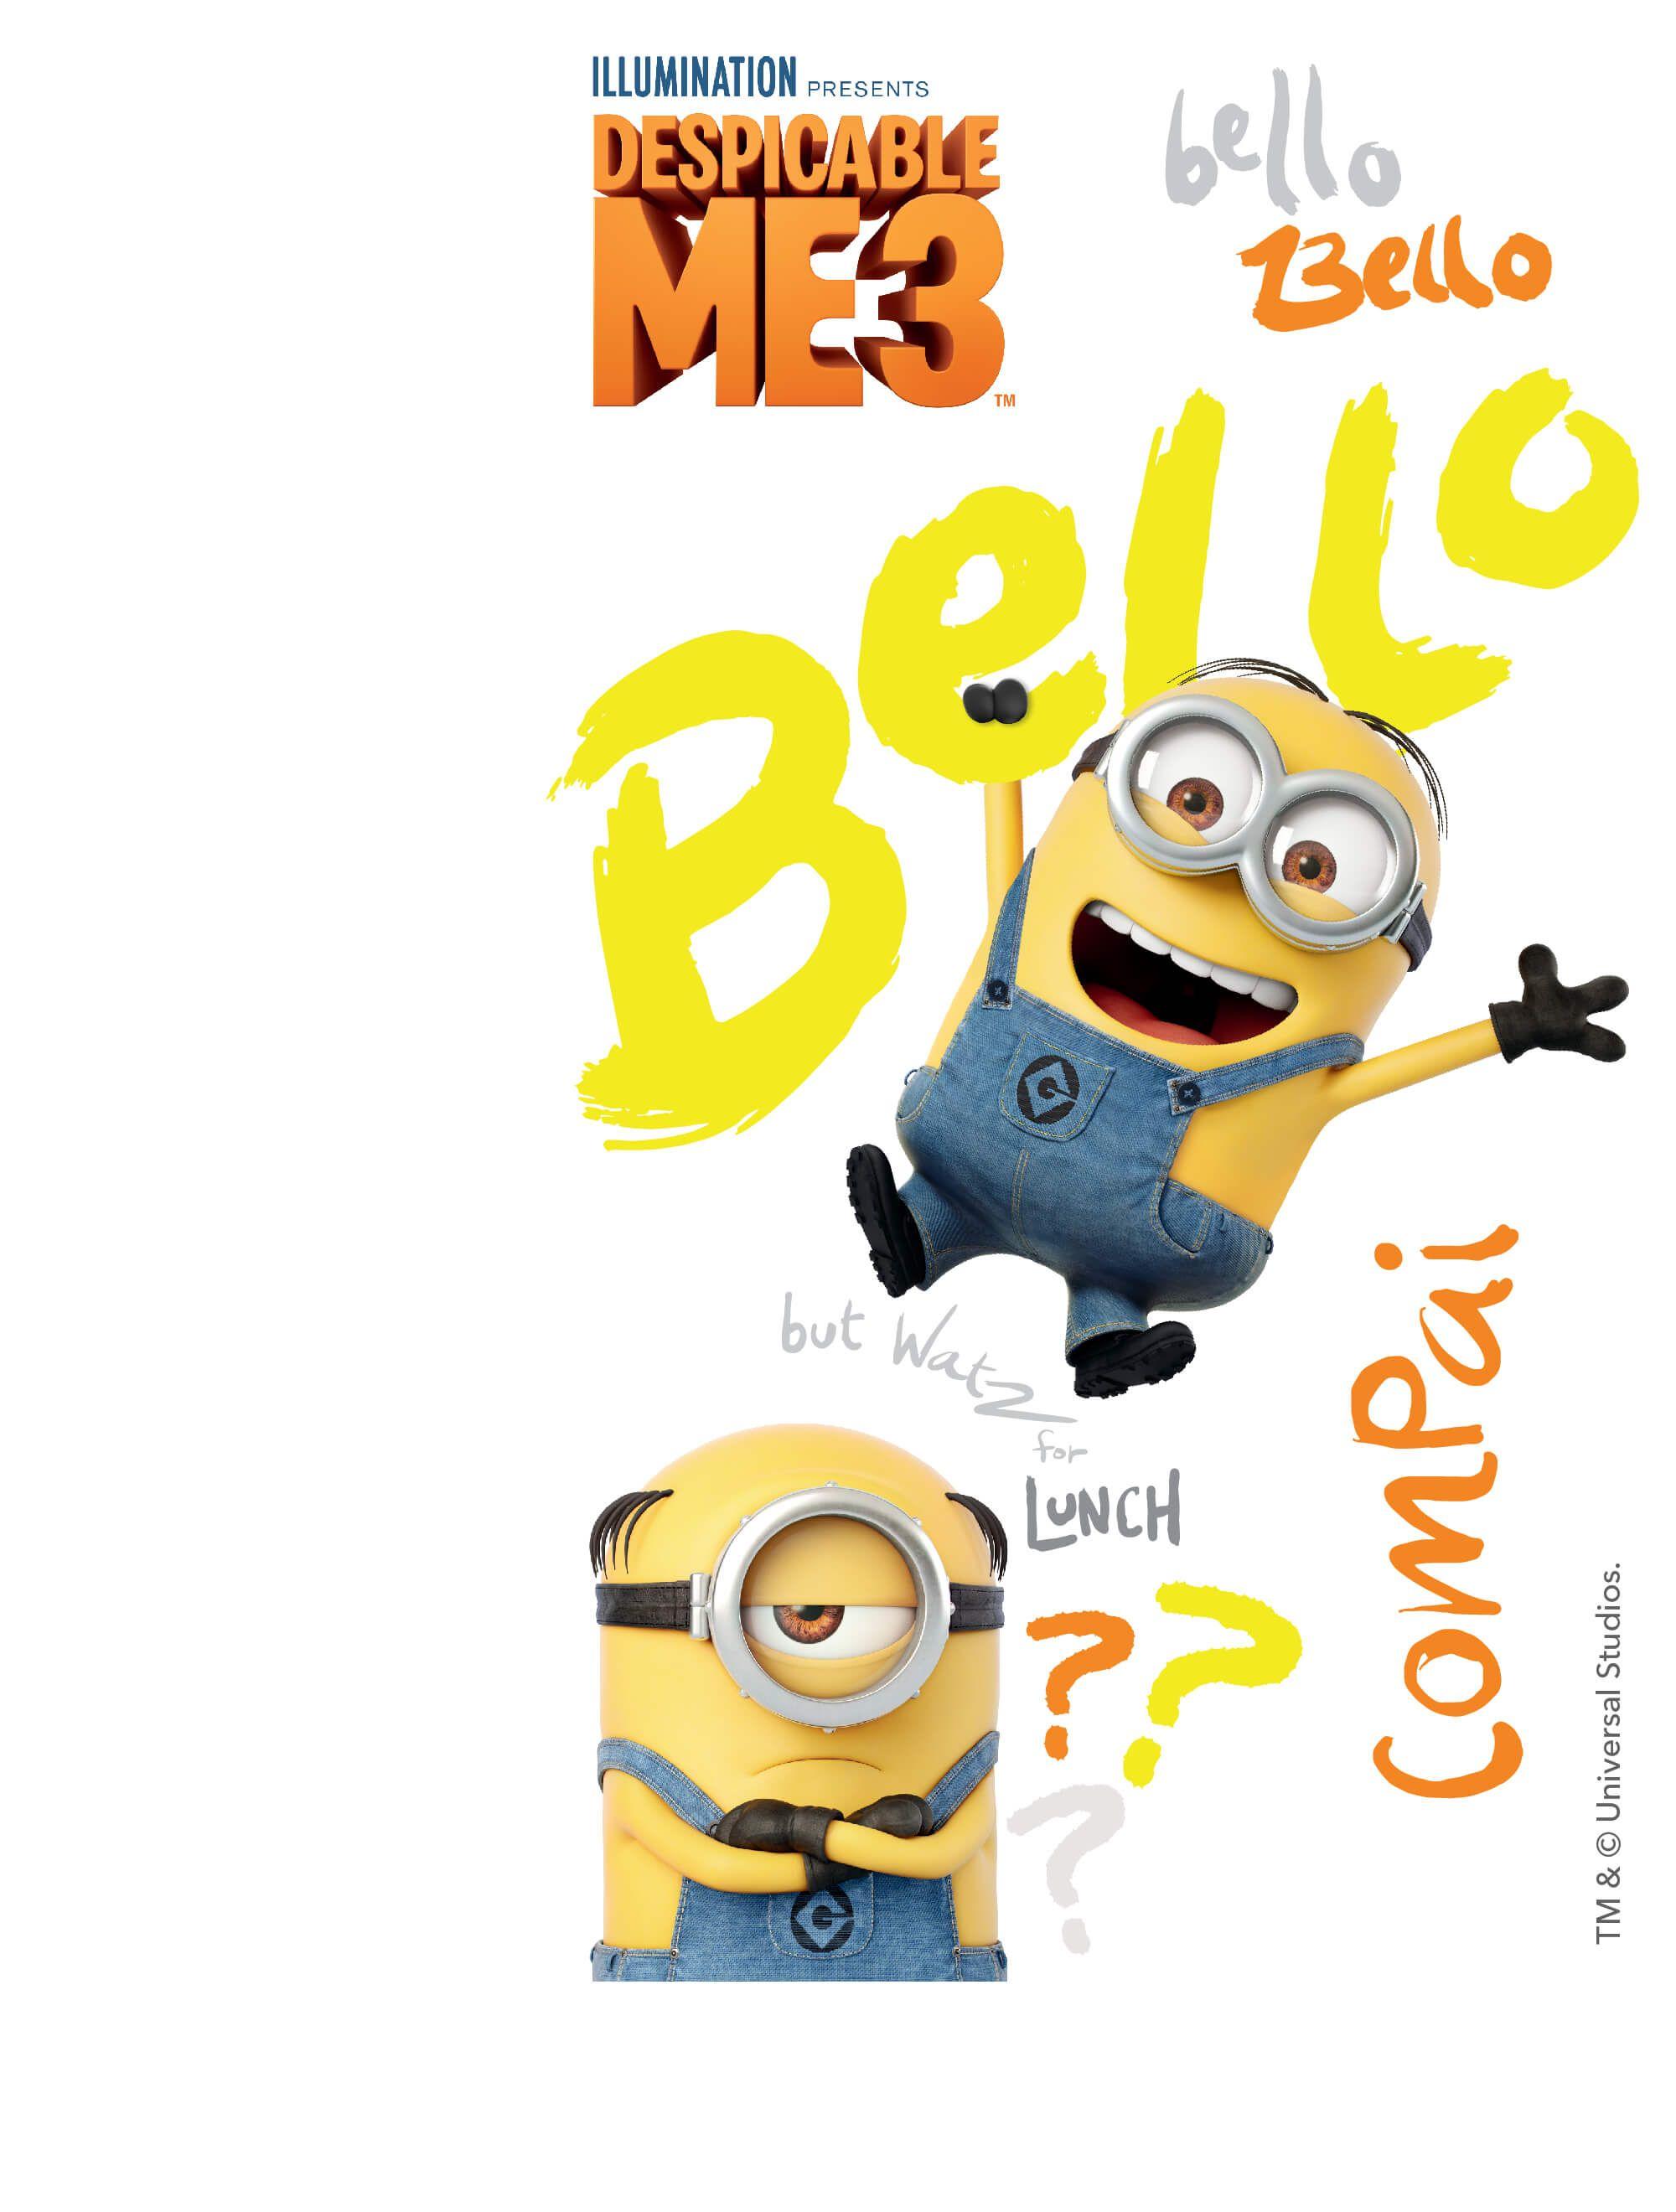 FREE Despicable Me 3 Android and iPhone® Wallpaper - #ClairesBlog